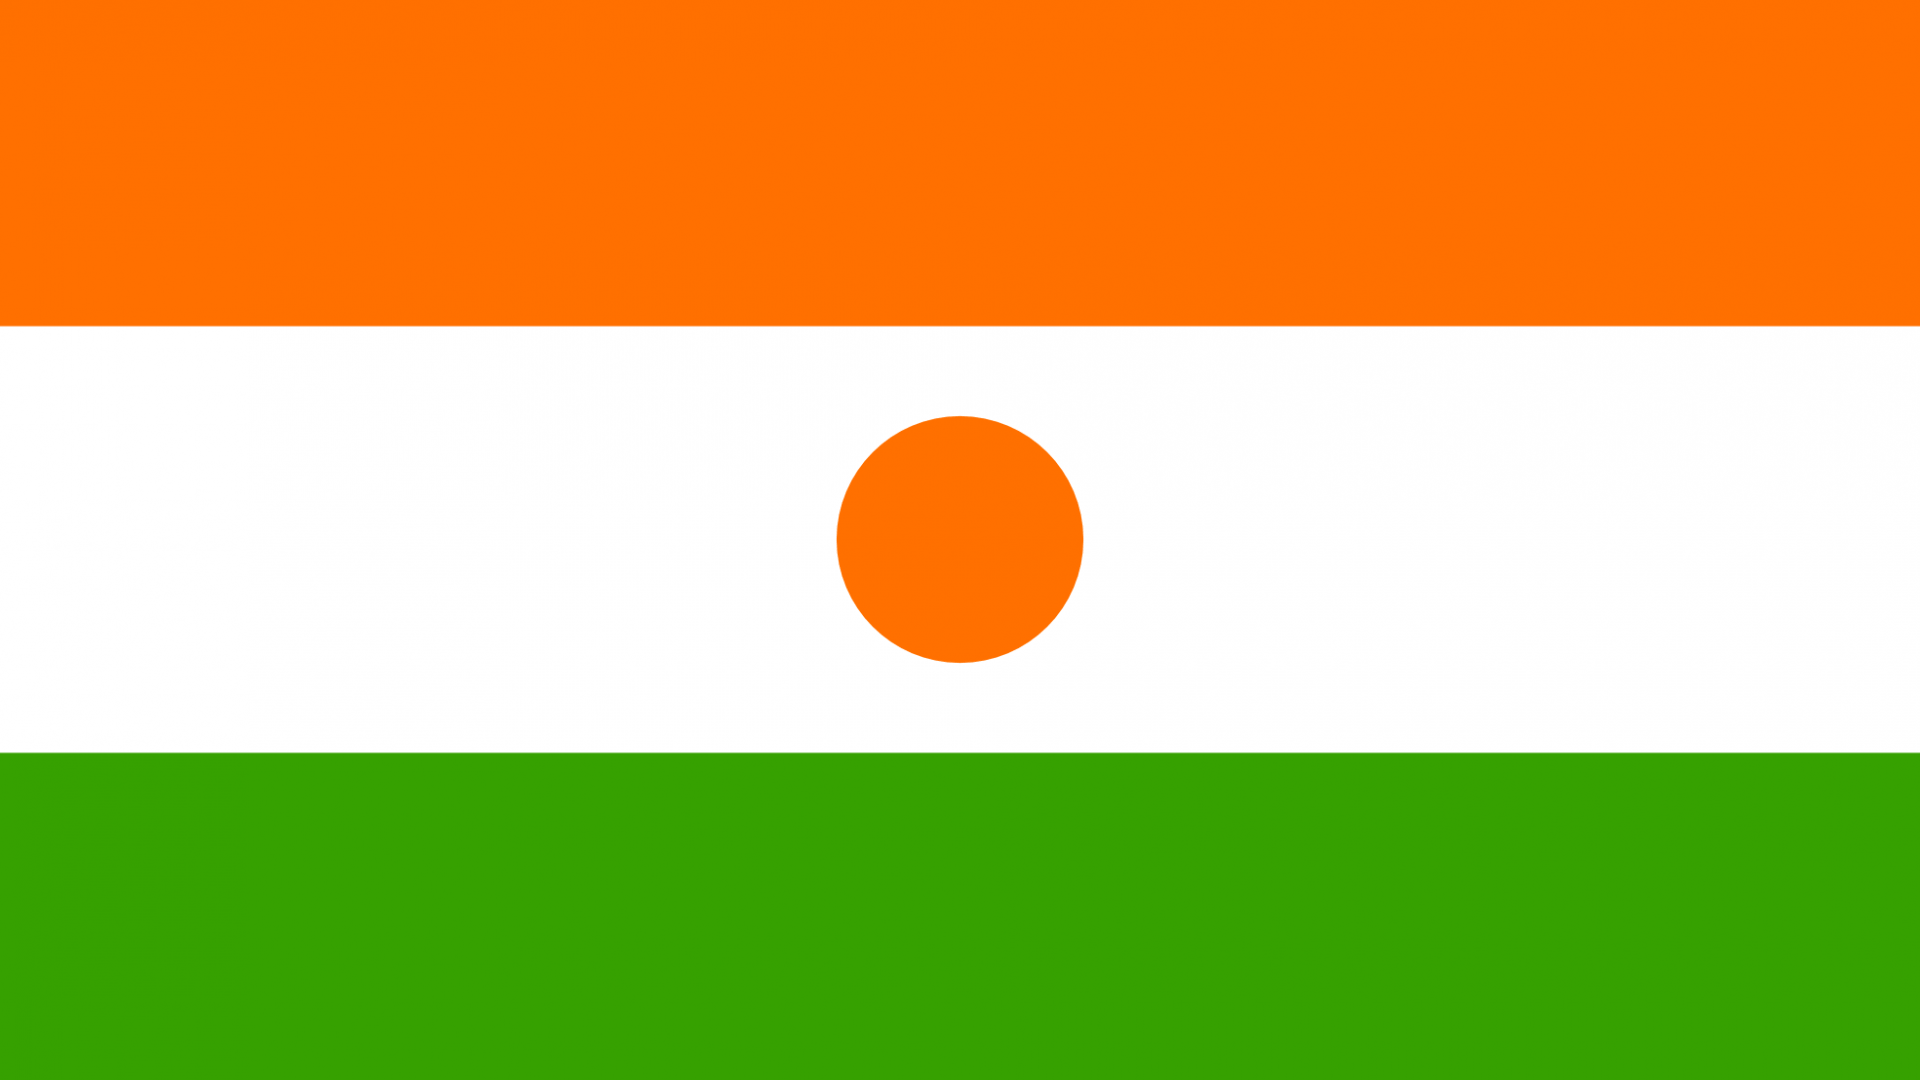 Niger Flag, High Definition, High Quality, Widescreen